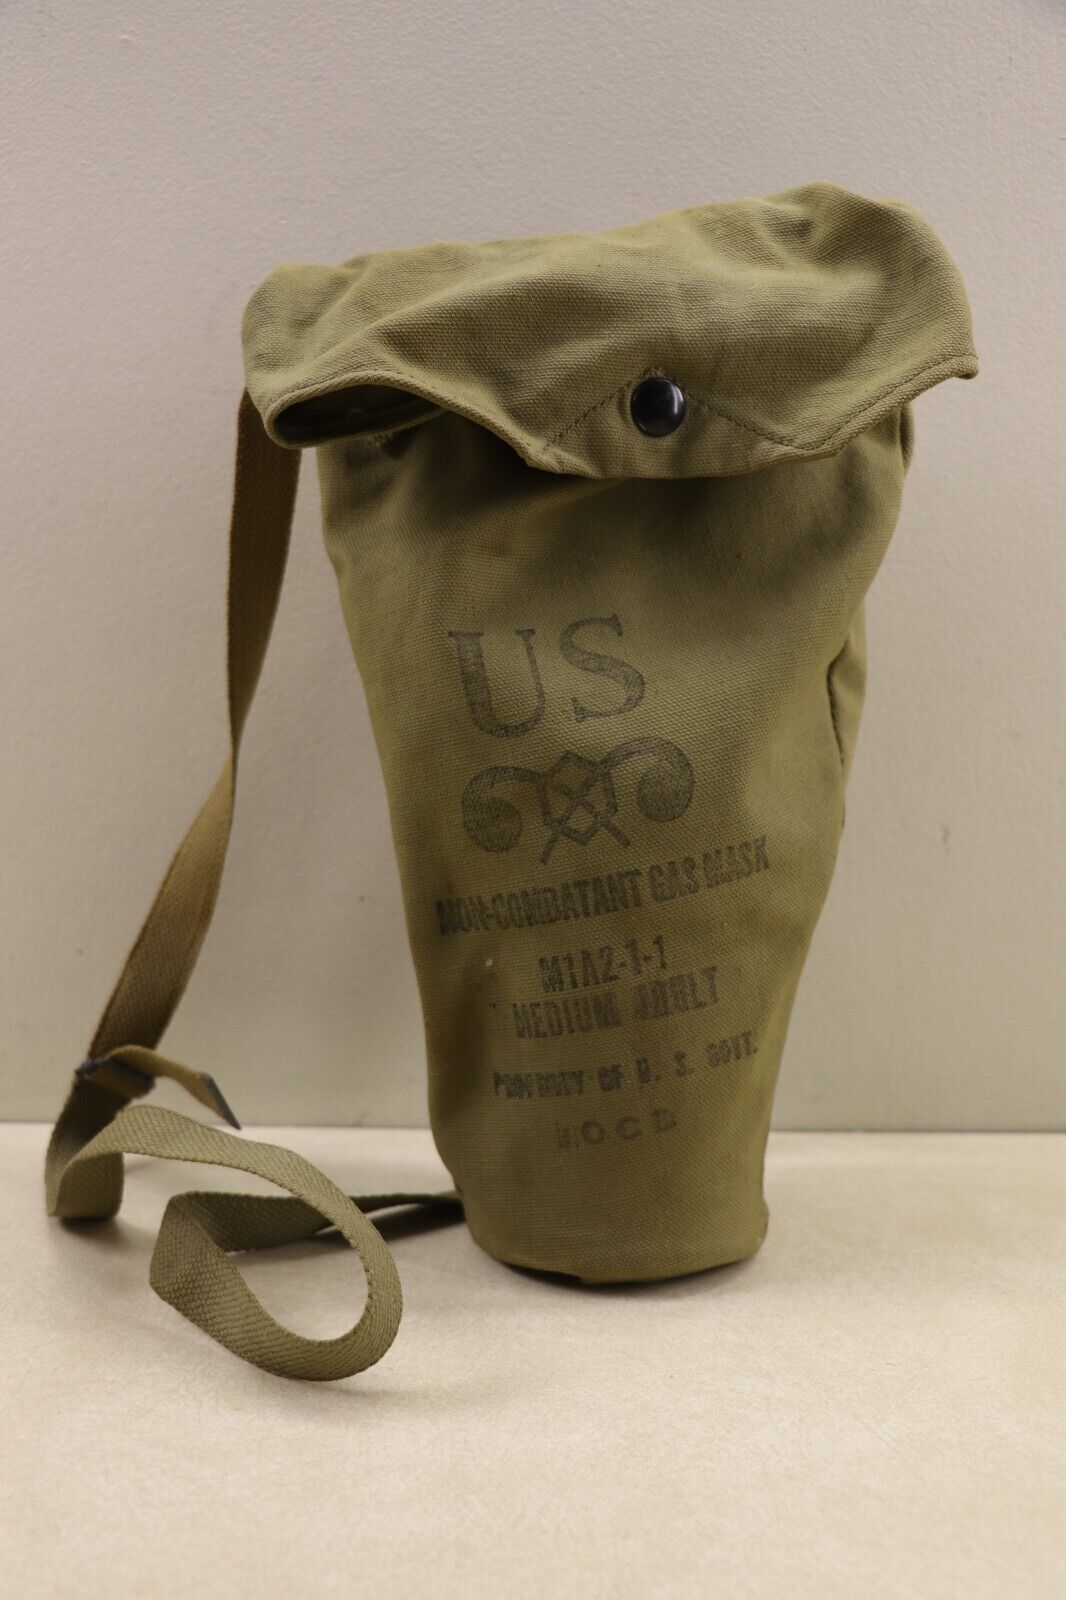 Original WW2 US Military Non-Combatant M1A2-1-1 Med Adult Gas Mask & Bag WWll